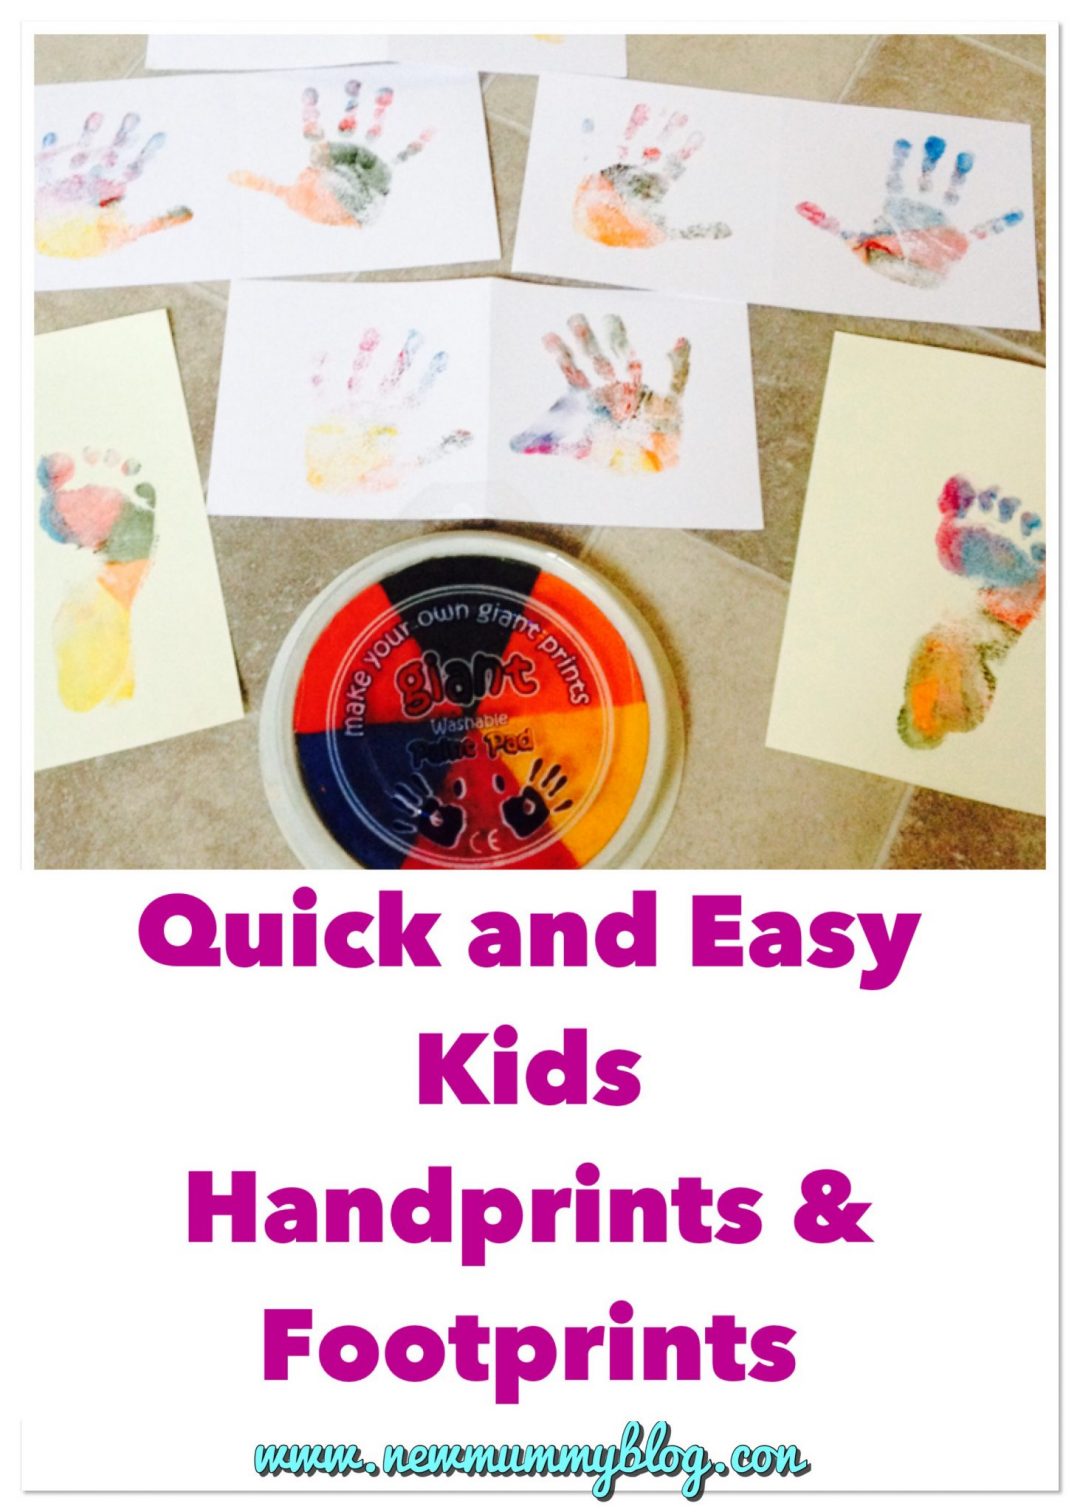 Quick and easy handprints and footprints - kids crafts and art - perfect gifts for family and grandparents